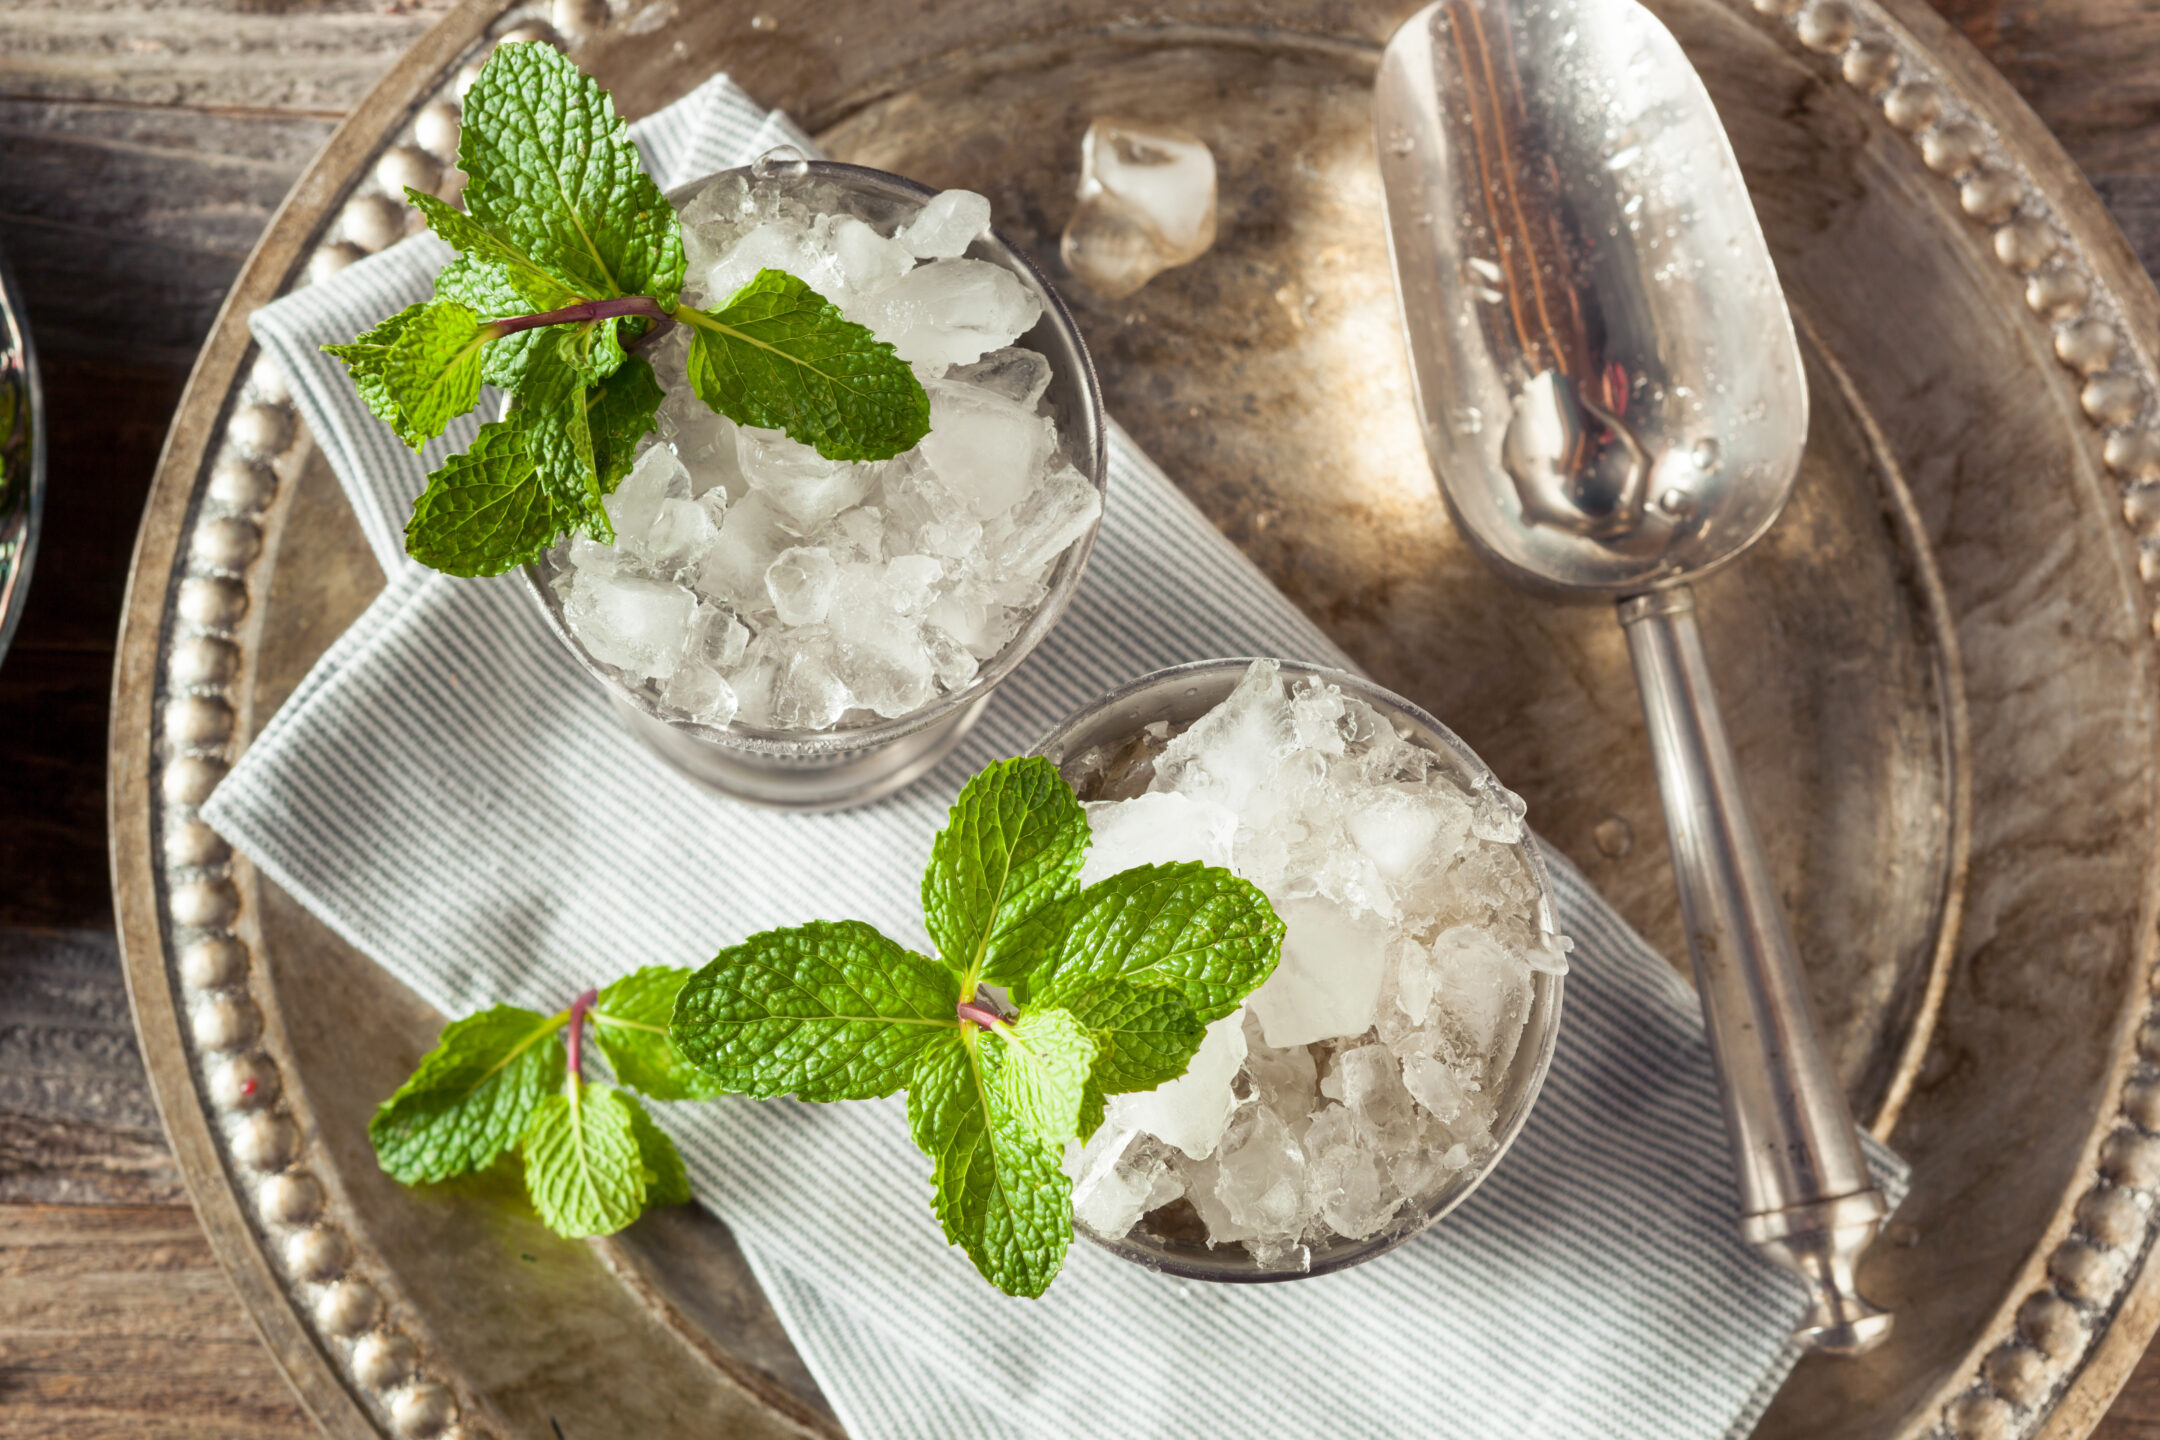 Cold Refreshing Classic Mint Julep